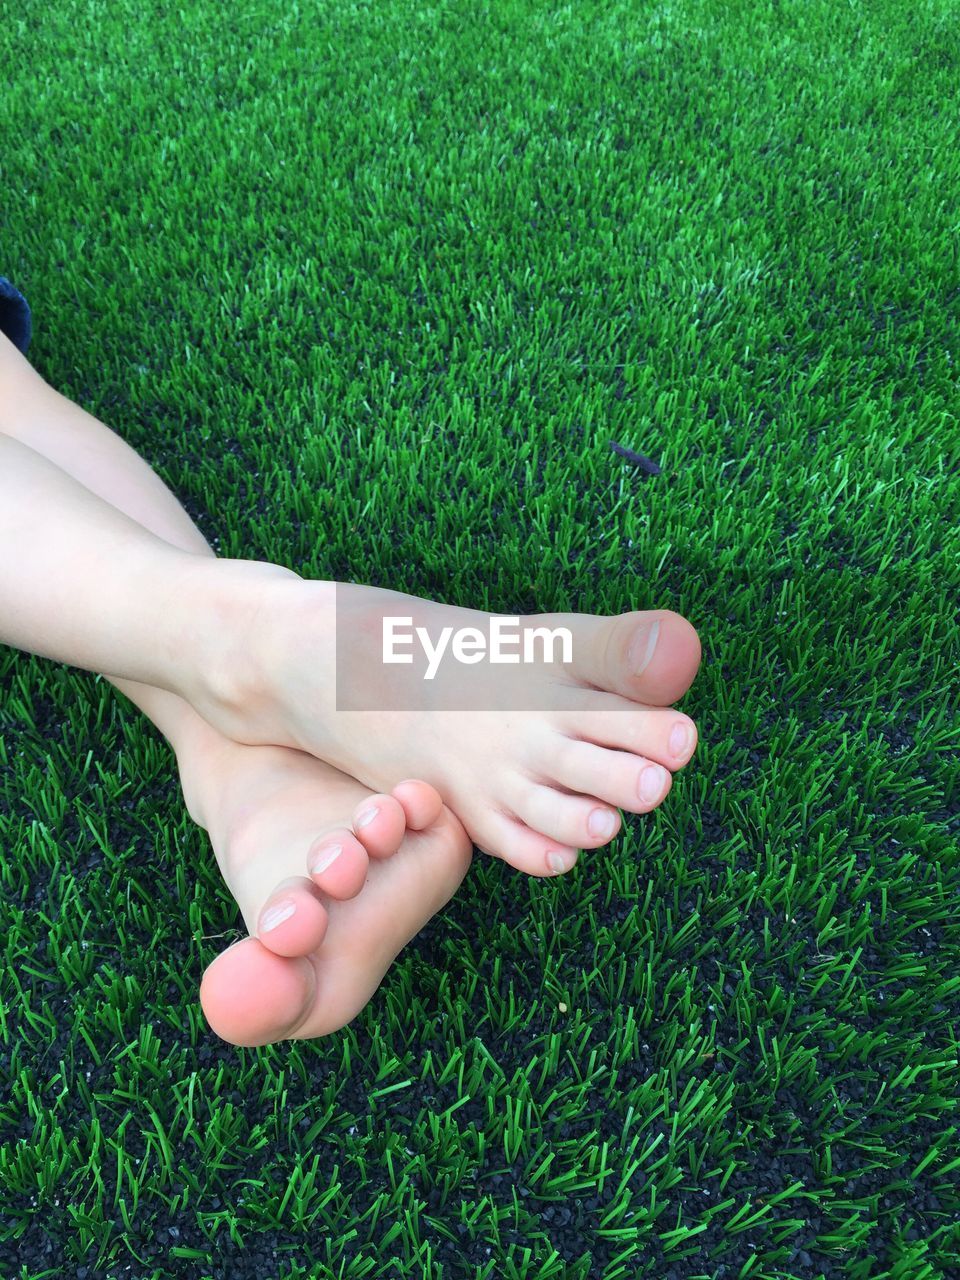 Low section of child on grass